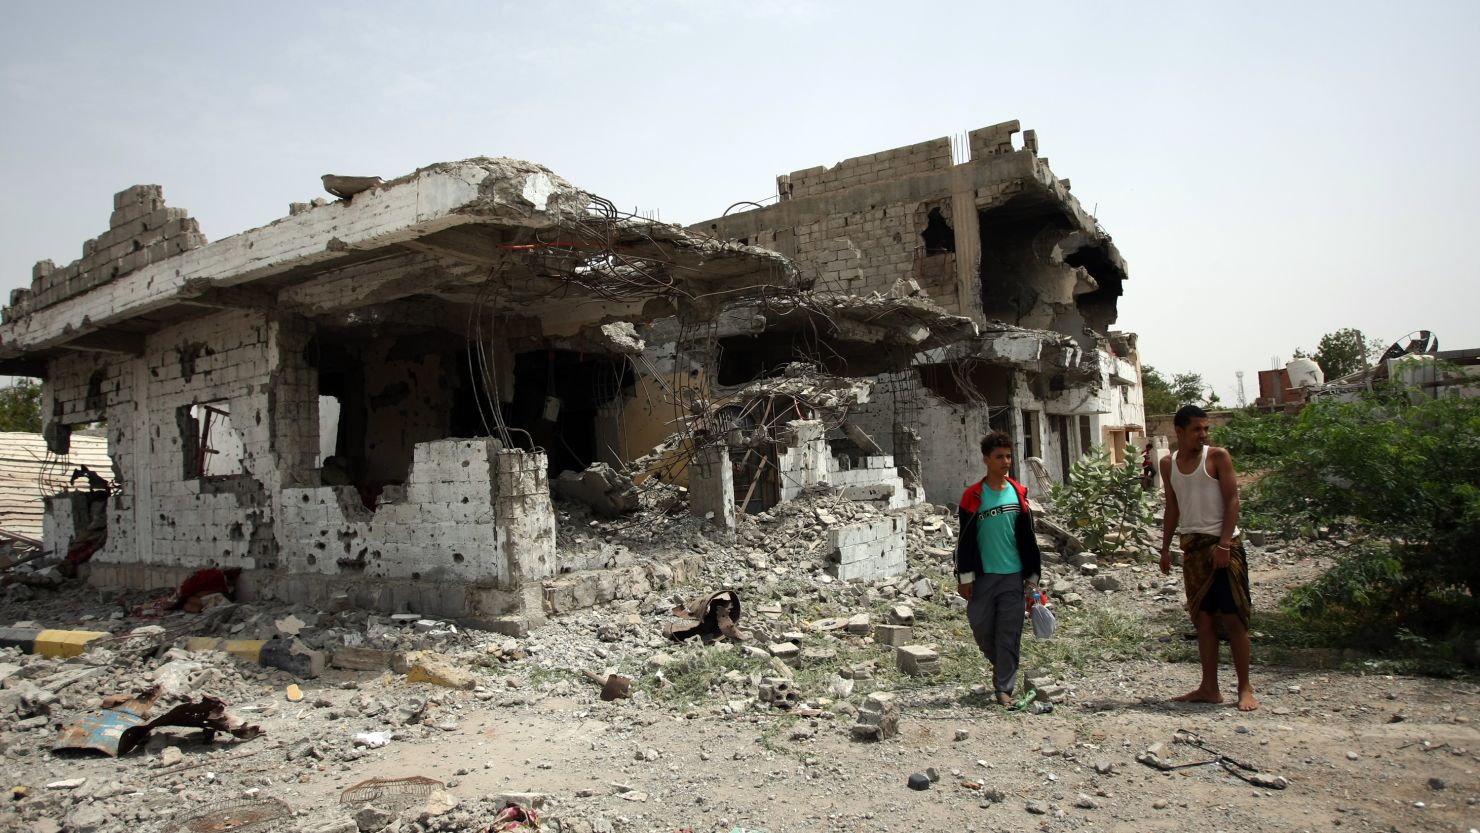 Destruction caused by recent fighting between the army and al Qaeda-linked militants on a road leading to the Yemeni city of Zinjibar on June 14, 2012. (File photo)